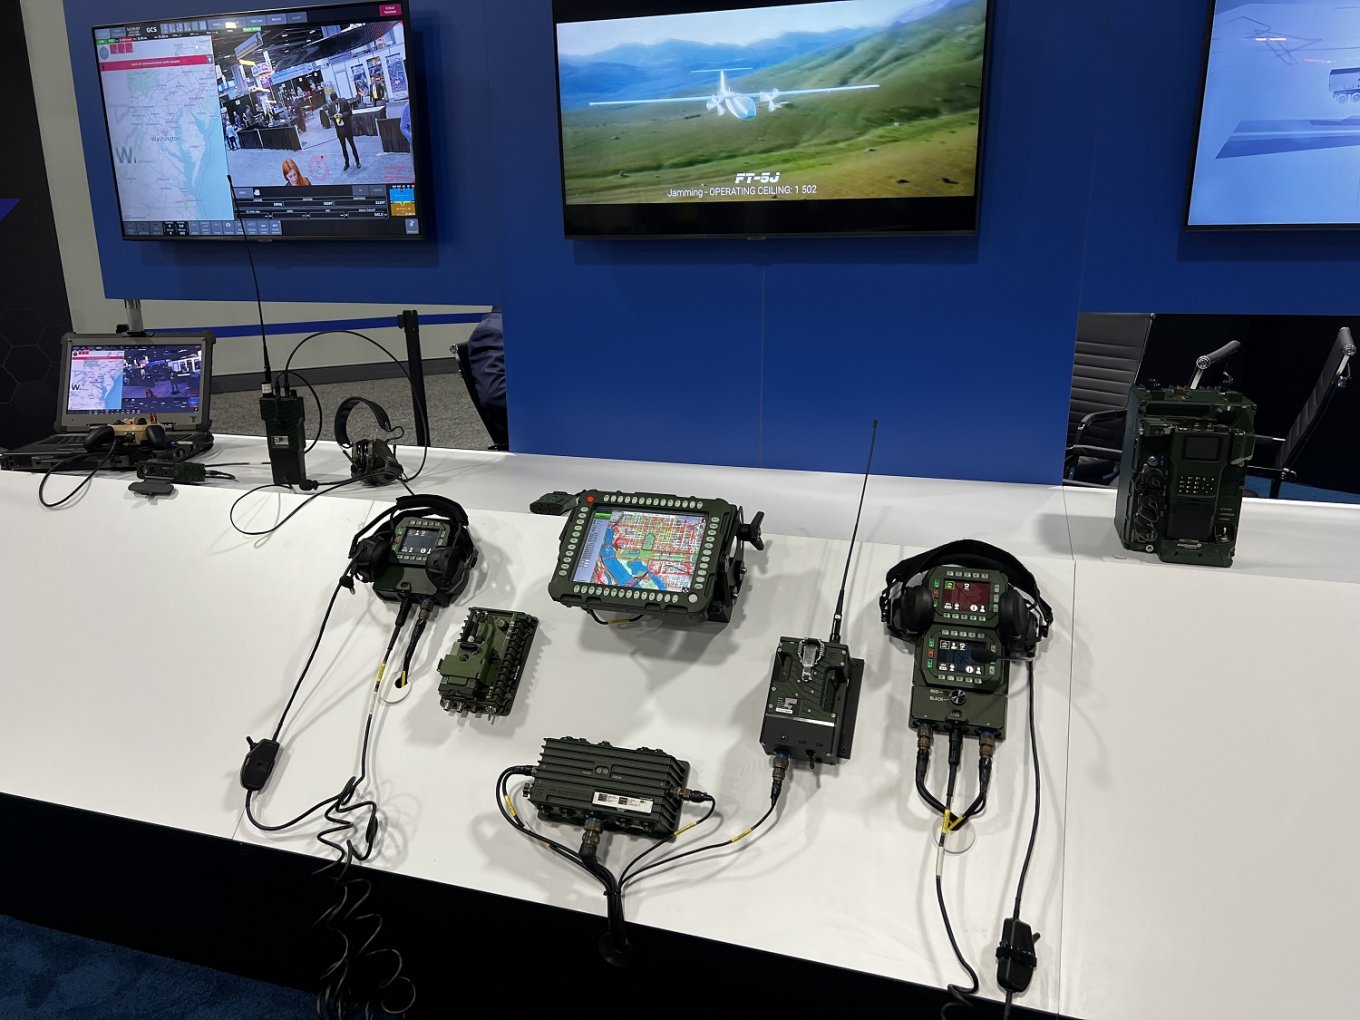 Fonet MK2 Vehicle Integration System and Silent Network Combat Communication Network by WB Group Presented at AUSA 2022, Defense Express, war in Ukraine, Russian-Ukrainian war